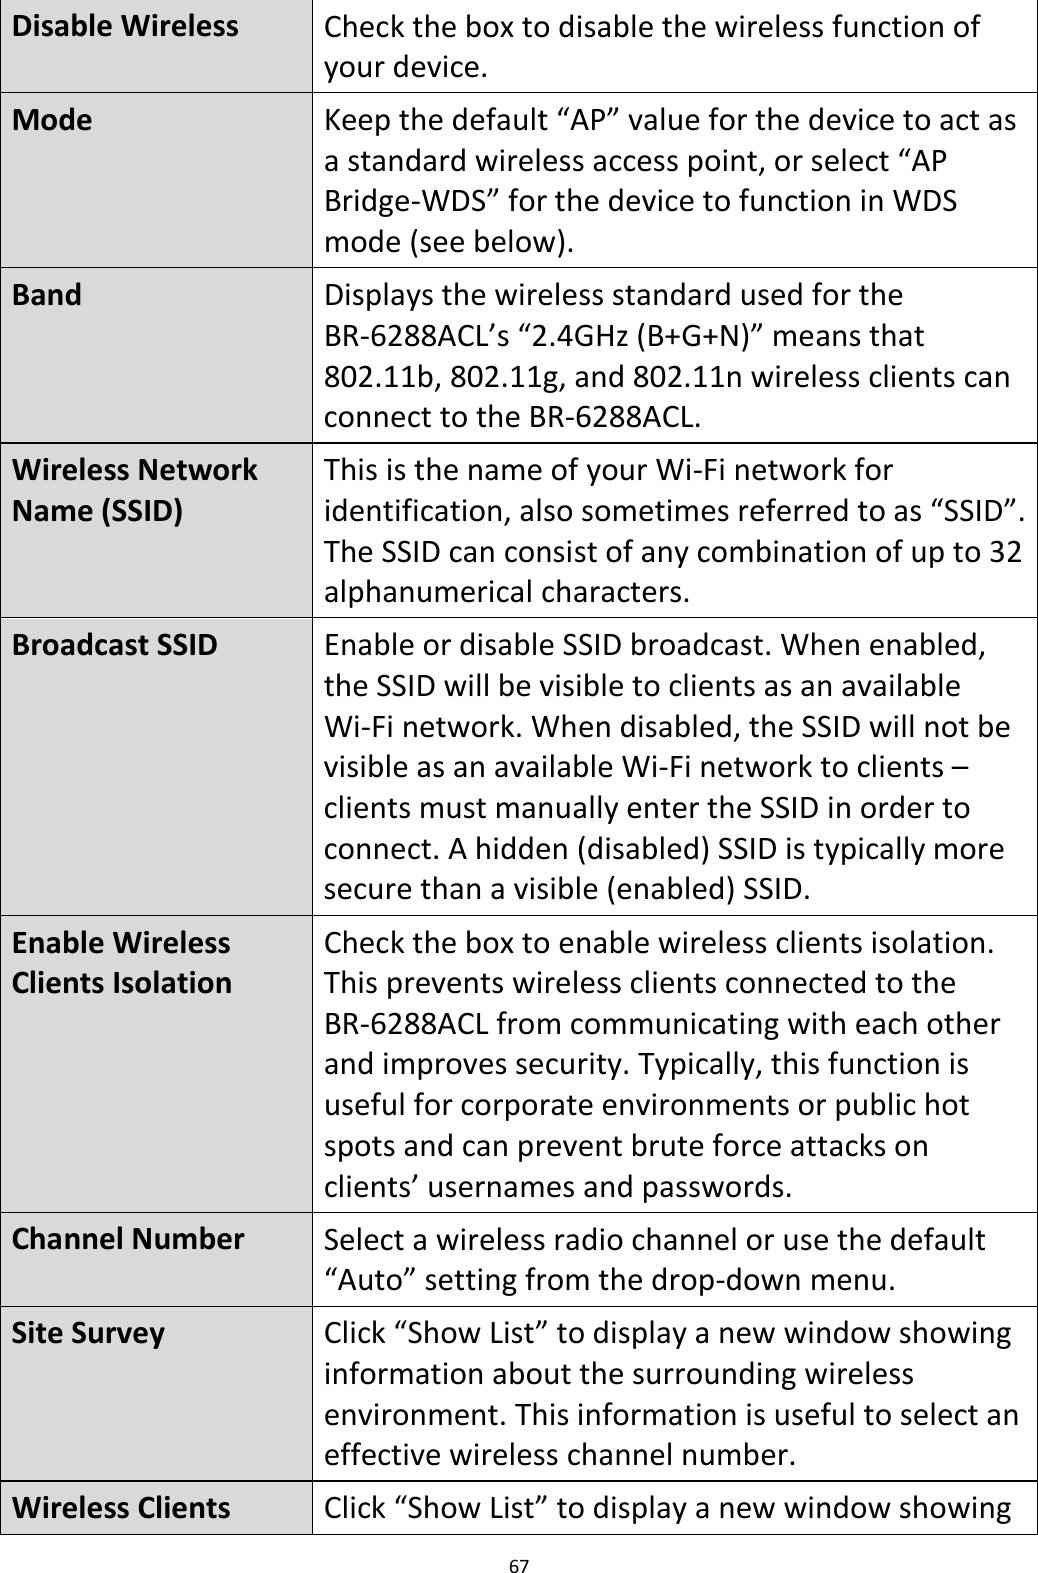 67  Disable Wireless  Check the box to disable the wireless function of your device. Mode Keep the default “AP” value for the device to act as a standard wireless access point, or select “AP Bridge-WDS” for the device to function in WDS mode (see below). Band Displays the wireless standard used for the BR-6288ACL’s “2.4GHz (B+G+N)” means that 802.11b, 802.11g, and 802.11n wireless clients can connect to the BR-6288ACL. Wireless Network Name (SSID) This is the name of your Wi-Fi network for identification, also sometimes referred to as “SSID”. The SSID can consist of any combination of up to 32 alphanumerical characters. Broadcast SSID Enable or disable SSID broadcast. When enabled, the SSID will be visible to clients as an available Wi-Fi network. When disabled, the SSID will not be visible as an available Wi-Fi network to clients – clients must manually enter the SSID in order to connect. A hidden (disabled) SSID is typically more secure than a visible (enabled) SSID. Enable Wireless Clients Isolation Check the box to enable wireless clients isolation. This prevents wireless clients connected to the BR-6288ACL from communicating with each other and improves security. Typically, this function is useful for corporate environments or public hot spots and can prevent brute force attacks on clients’ usernames and passwords. Channel Number Select a wireless radio channel or use the default “Auto” setting from the drop-down menu. Site Survey Click “Show List” to display a new window showing information about the surrounding wireless environment. This information is useful to select an effective wireless channel number. Wireless Clients Click “Show List” to display a new window showing 